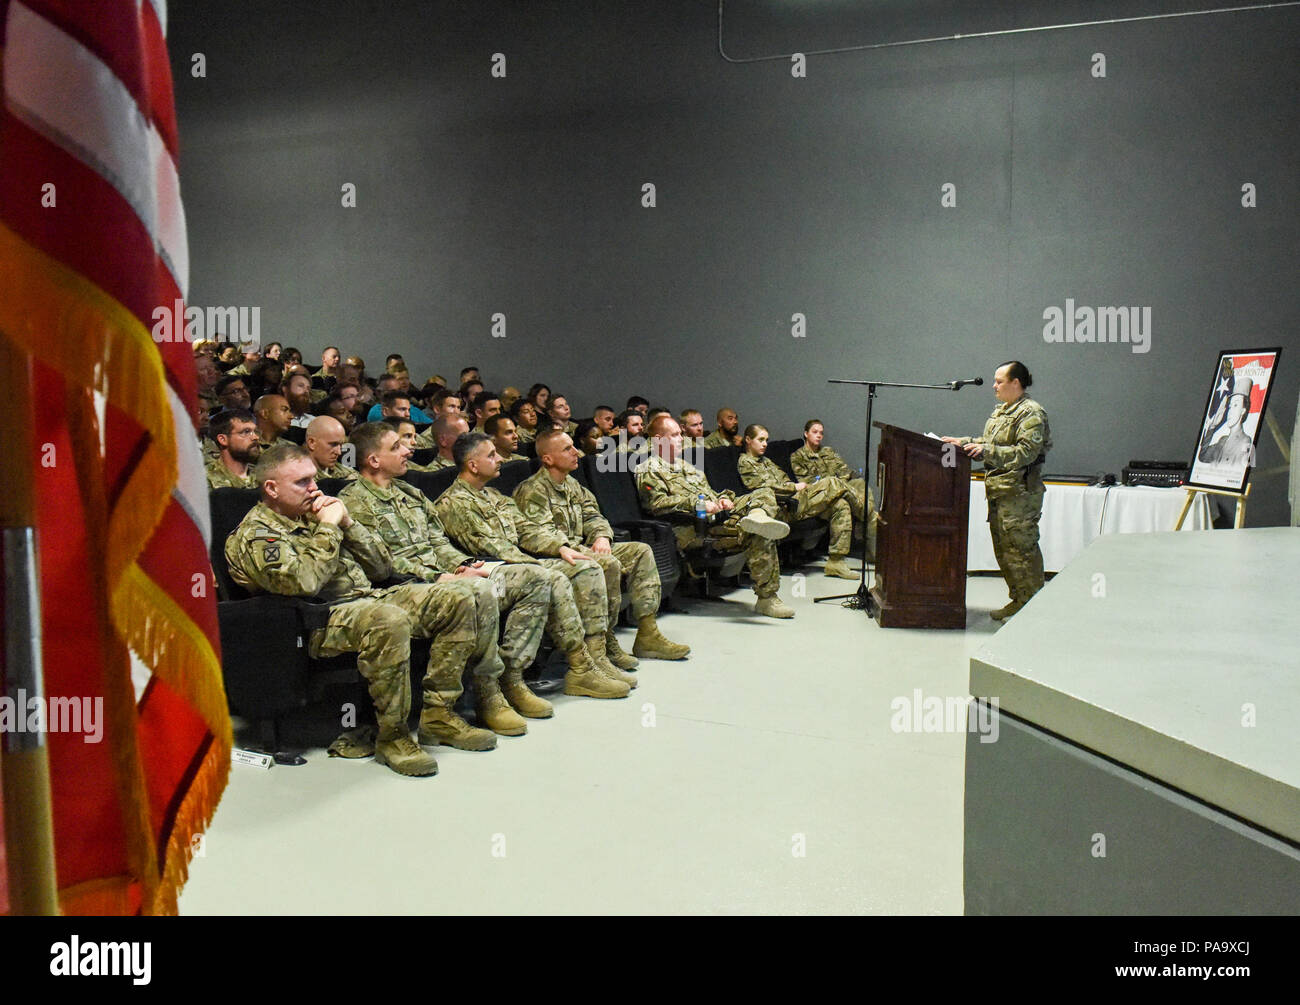 Chief Master Sgt. Shelley Haskett, 455th Expeditionary Mission Support Group chief enlisted manager, speaks about the accomplishments of Senior Airman Breanne Balk, 455th Expeditionary Security Forces Squadron Fly Away Security Team member, during a Women’s History Month event at Bagram Air Field, Afghanistan, March 5, 2016. The event told the profiles in courage of five women from around the base who have made impact on their fellow service members and civilians. Balk was highlighted for her efforts to control the bleeding of an injured service member during an airlift to the Craig Joint-Thea Stock Photo